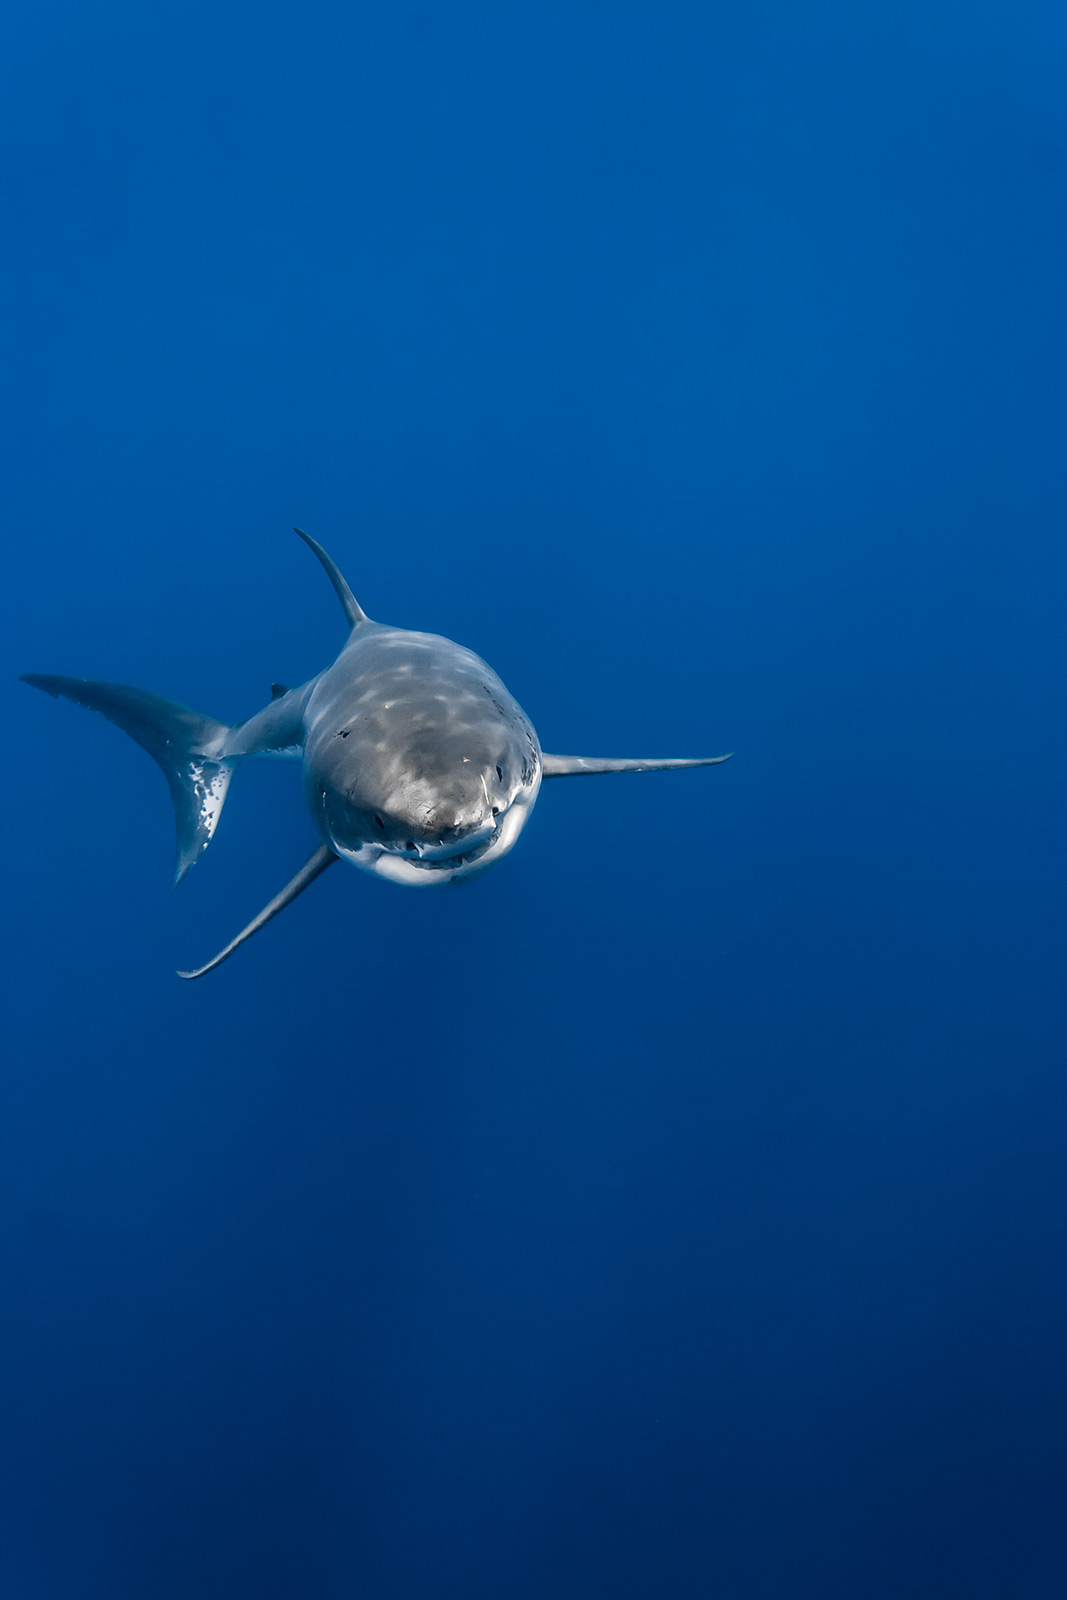 A great white shark rises from the depths below image